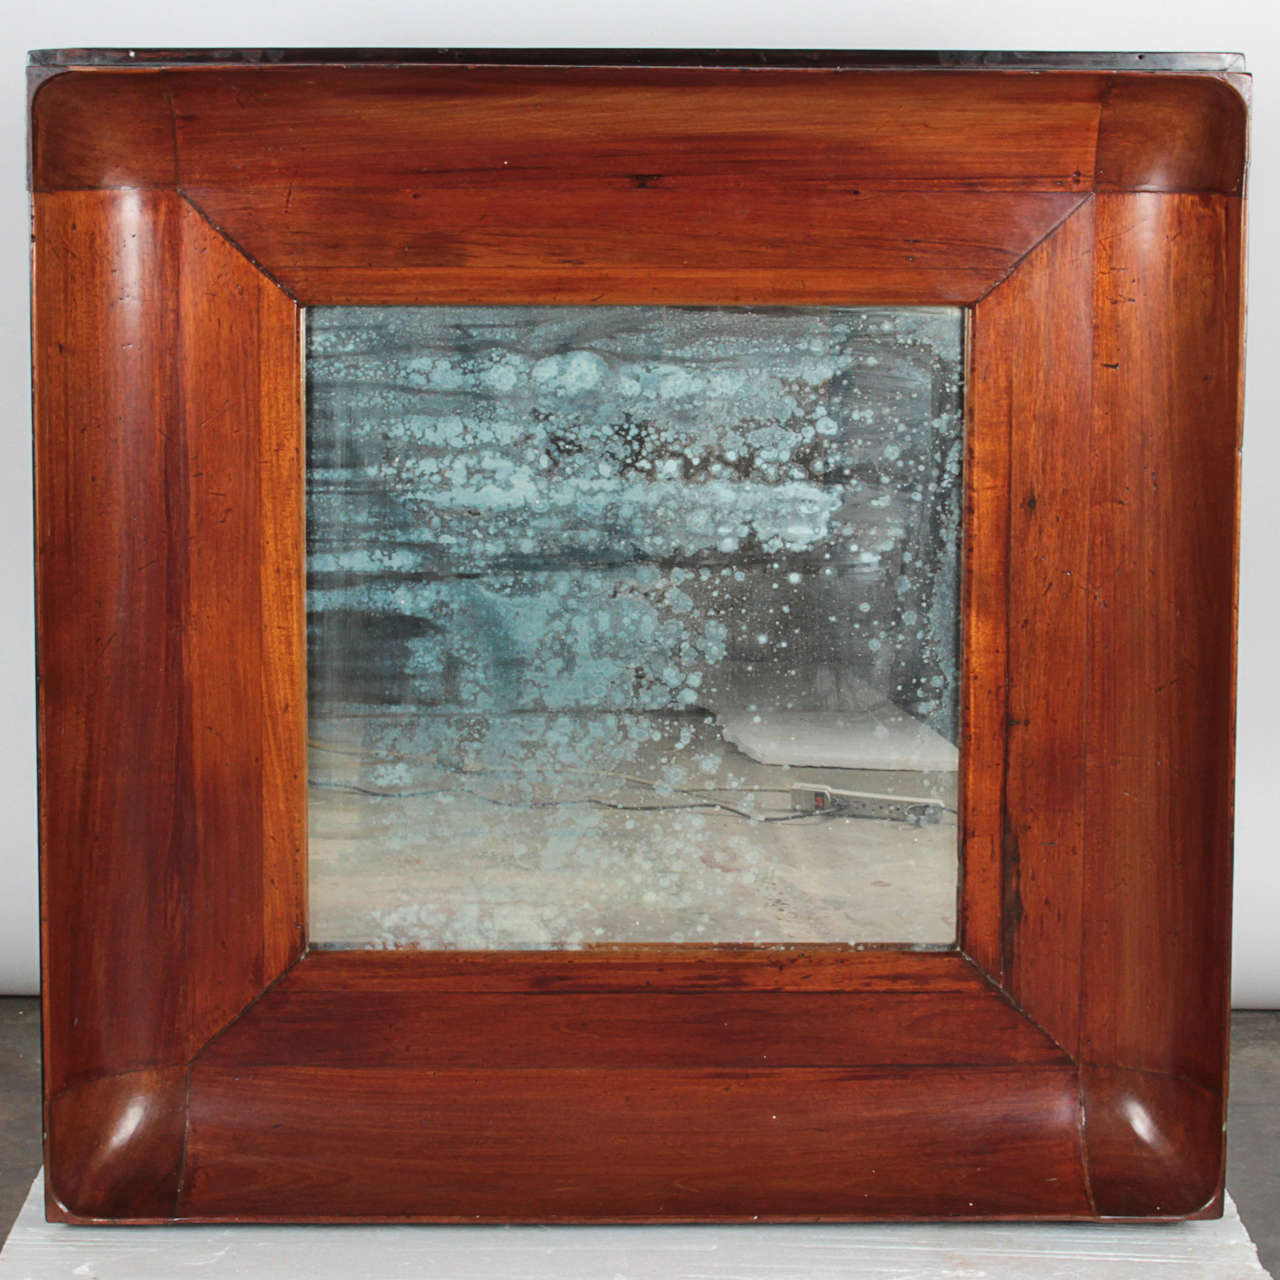 Incredibly unique antique mirror with heavy patina. Wood frame has a concave interior shape with stain that accentuates the characteristics of the wood. Outer edges of the wood have a beautiful worn black lacquer. Depth of the frame forms a ledge